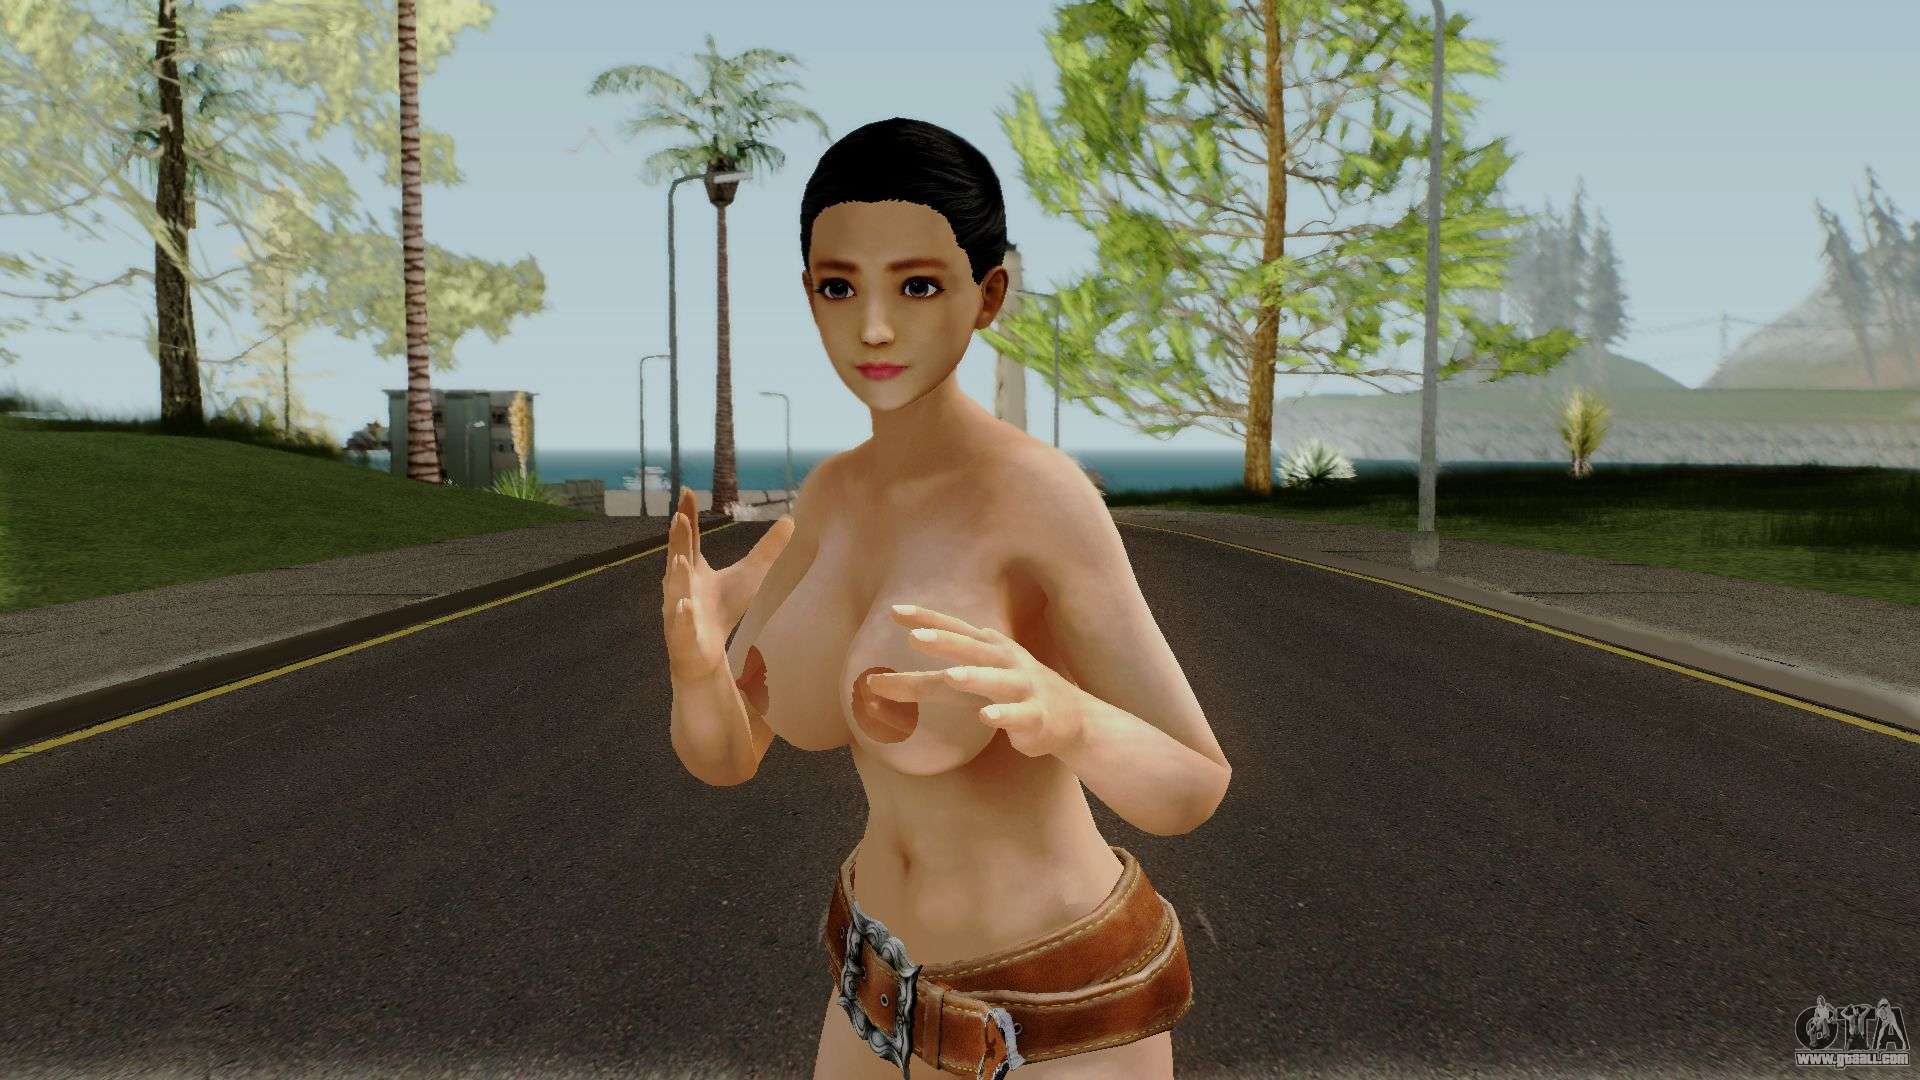 1920px x 1080px - Gta real girls nude - Sex photo